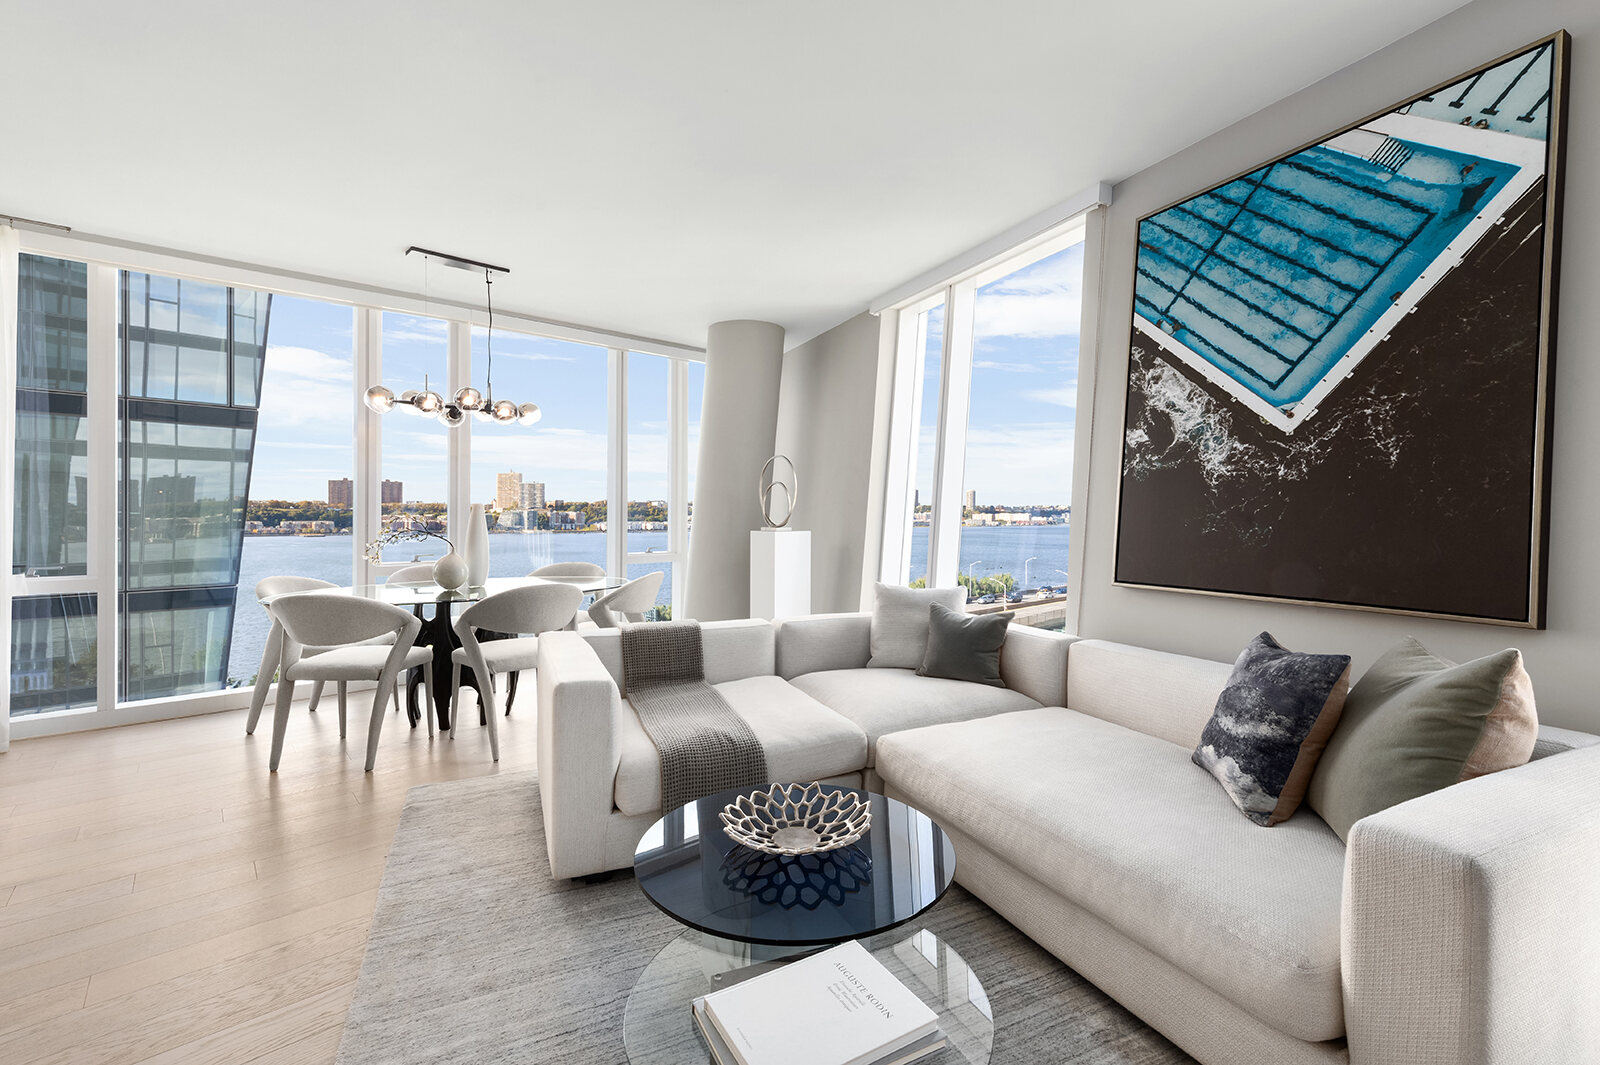 Modern urban living room with expansive windows offering a panoramic city view, adorned with a large artwork of a pool and furnished with a stylish sectional sofa and elegant dining area.